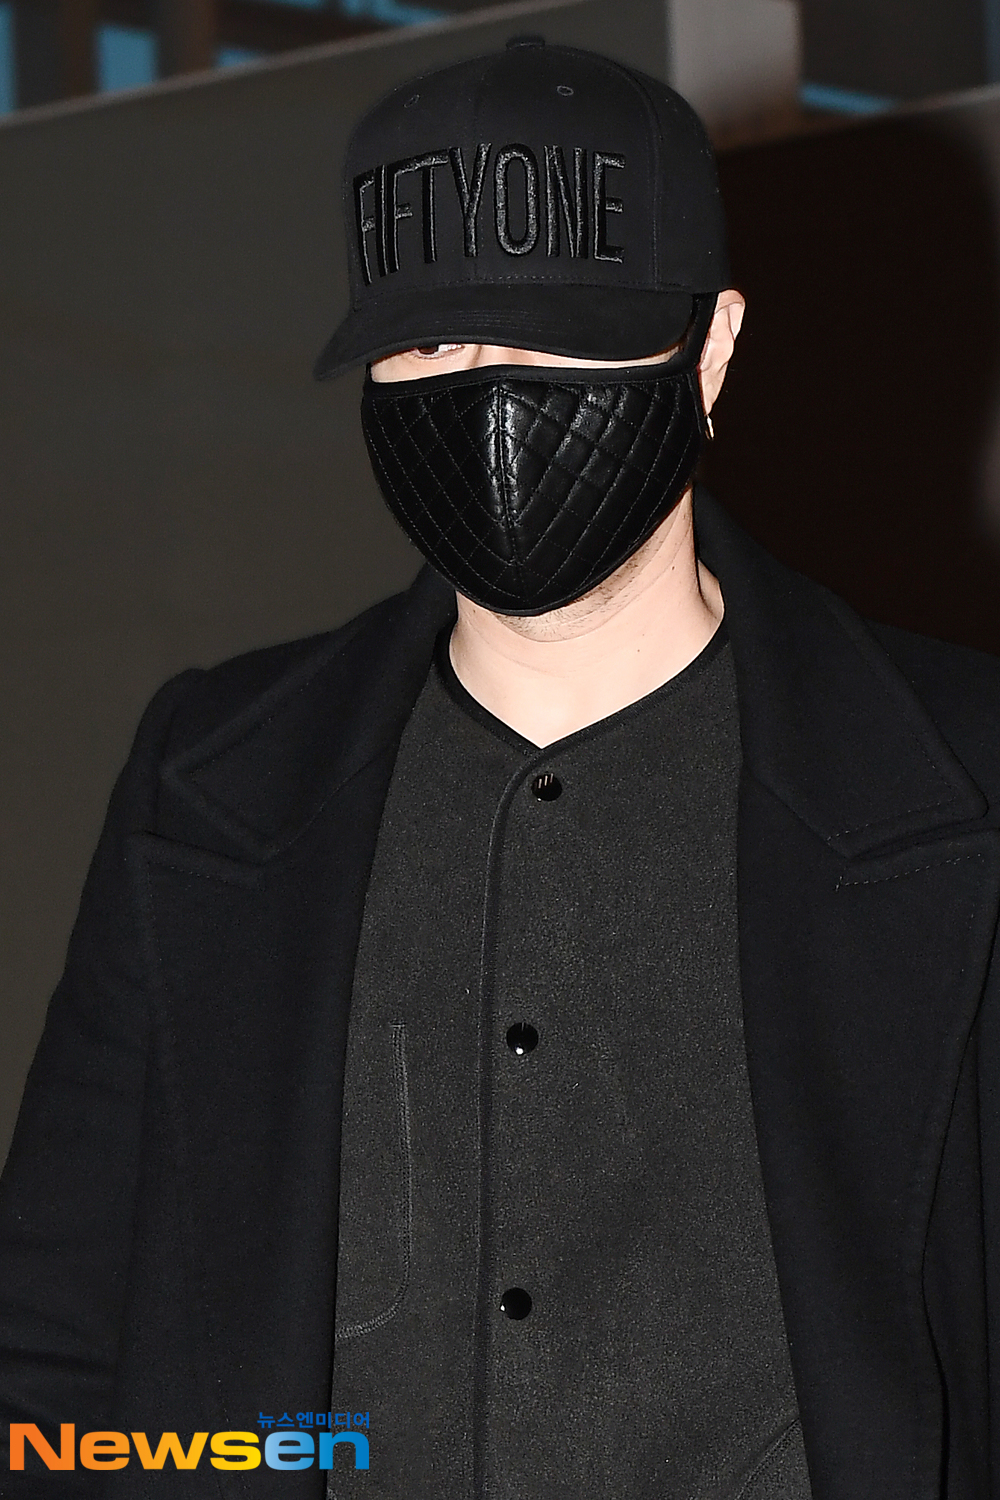 Actor So Ji-sub departed from Korea on March 15th at the Incheon International Airport in Unseo-dong, Jung-gu, Incheon, for a schedule for the 2019 So Ji-sub Asian fan meeting tour Hello.Actor So Ji-sub is leaving for Philippines Manila, showing off airport fashion.exponential earthquake